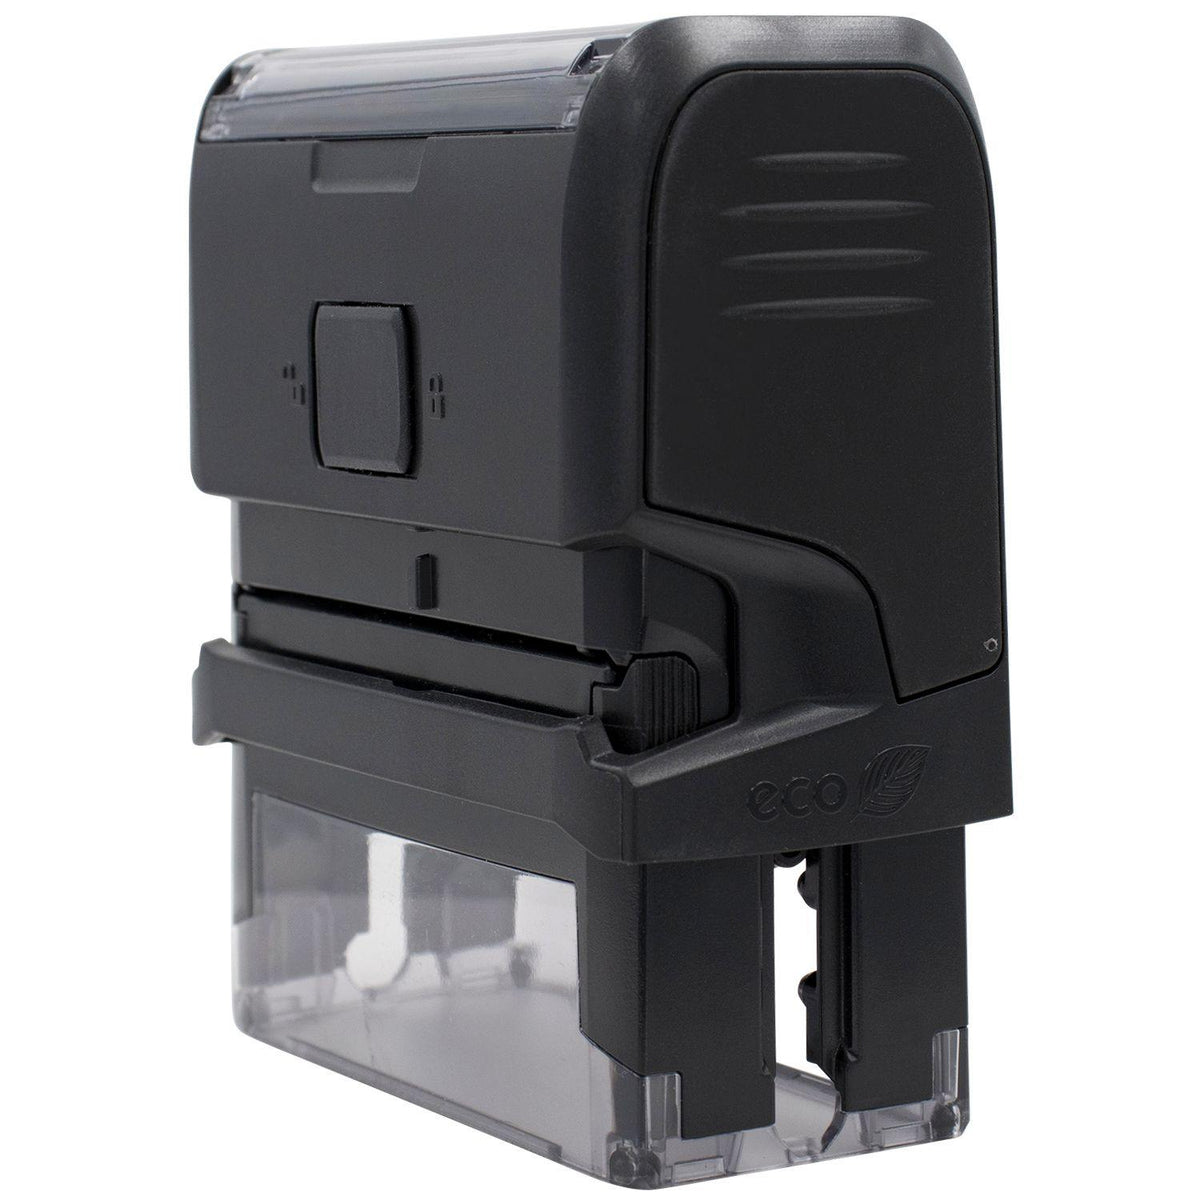 Self Inking Health Alert Stamp - Engineer Seal Stamps - Brand_Trodat, Impression Size_Small, Stamp Type_Self-Inking Stamp, Type of Use_Medical Office